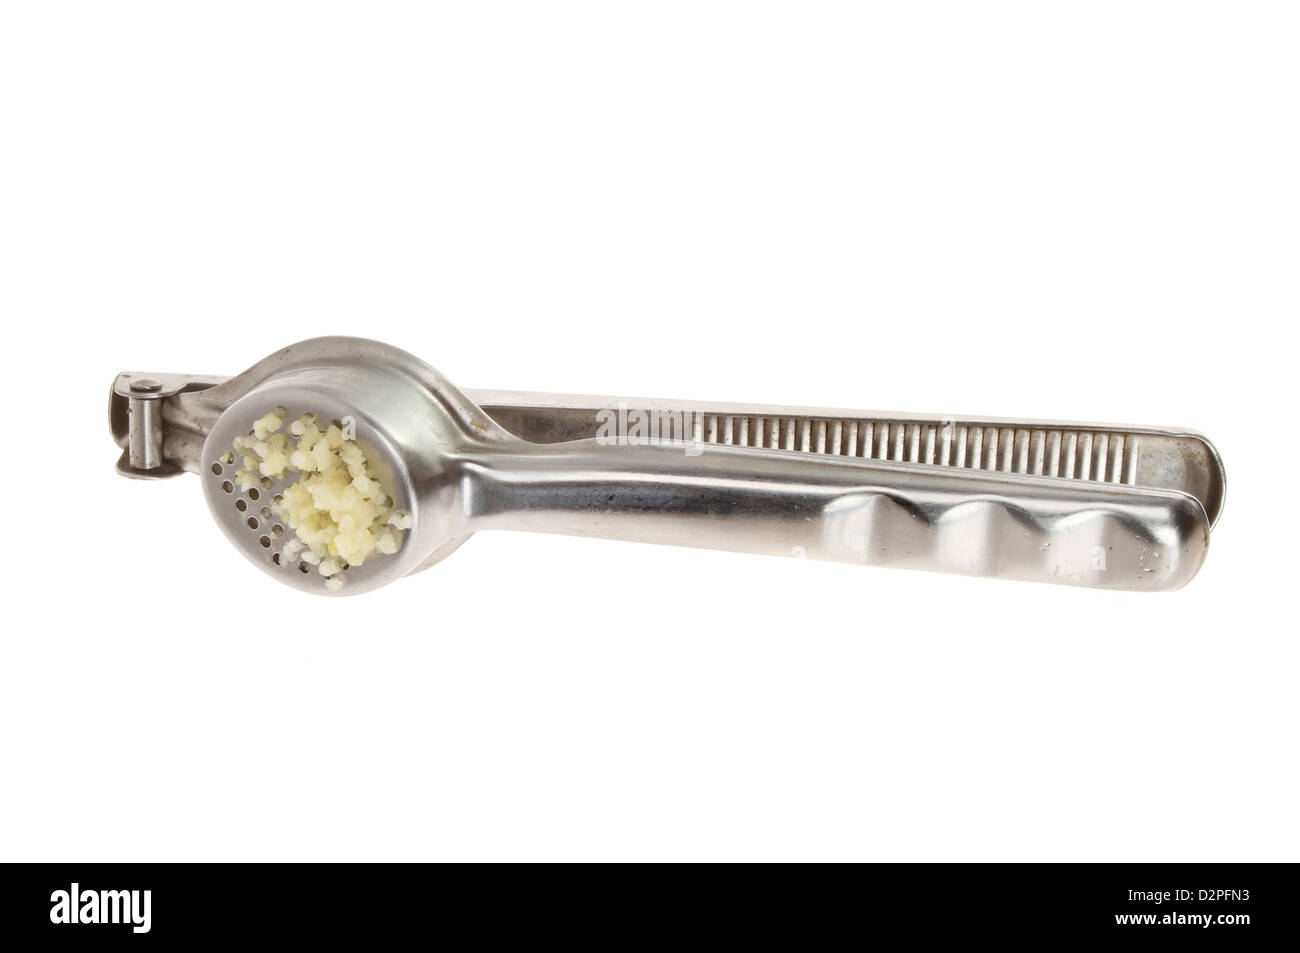 Garlic press with pressed garlic isolated against white Stock Photo